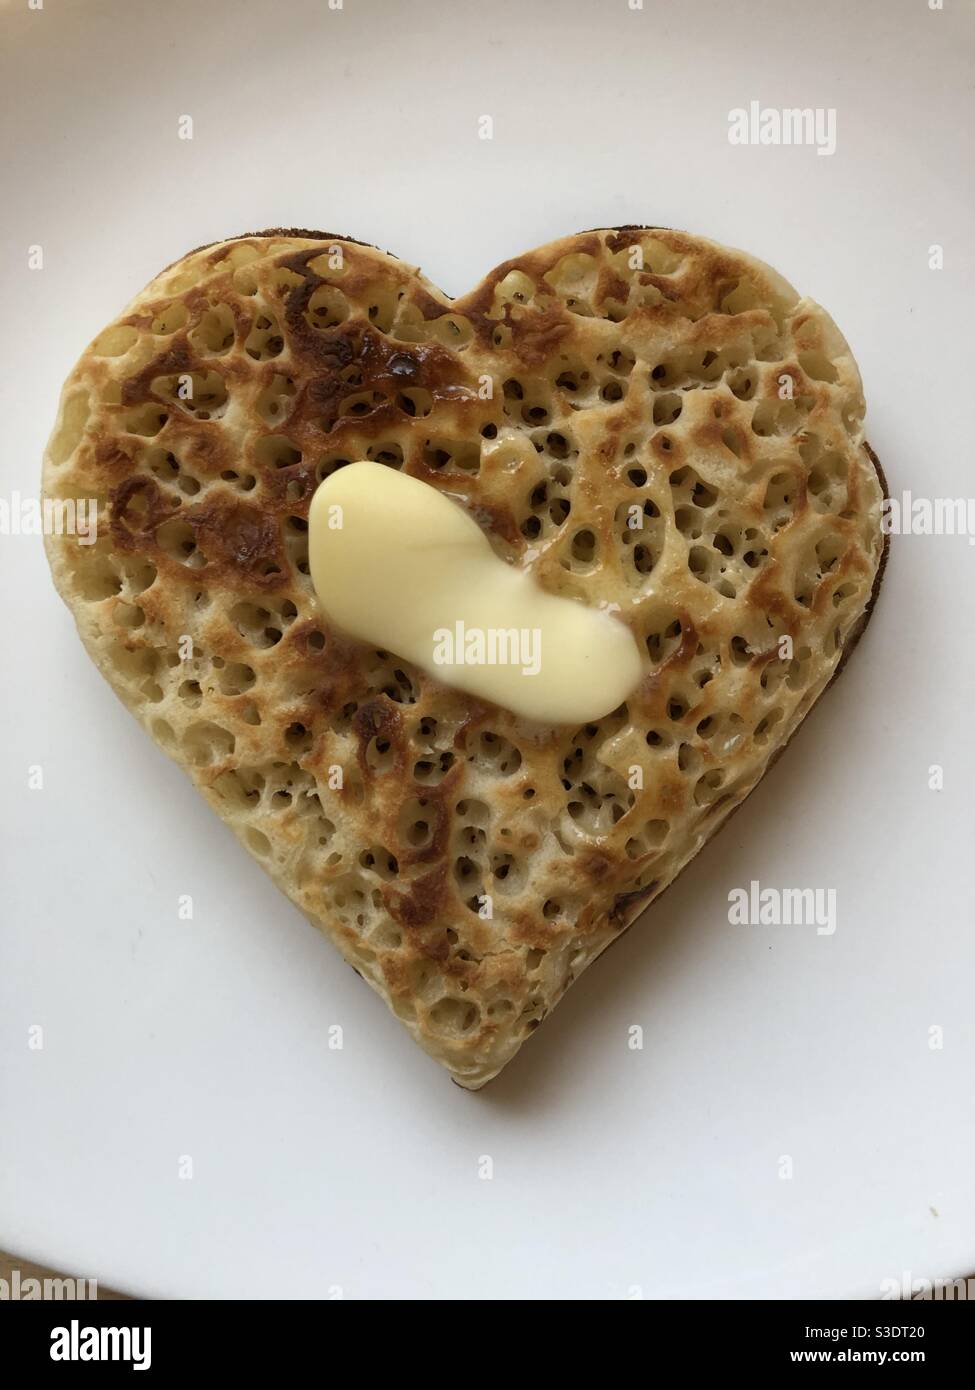 Buttered heart crumpet Stock Photo